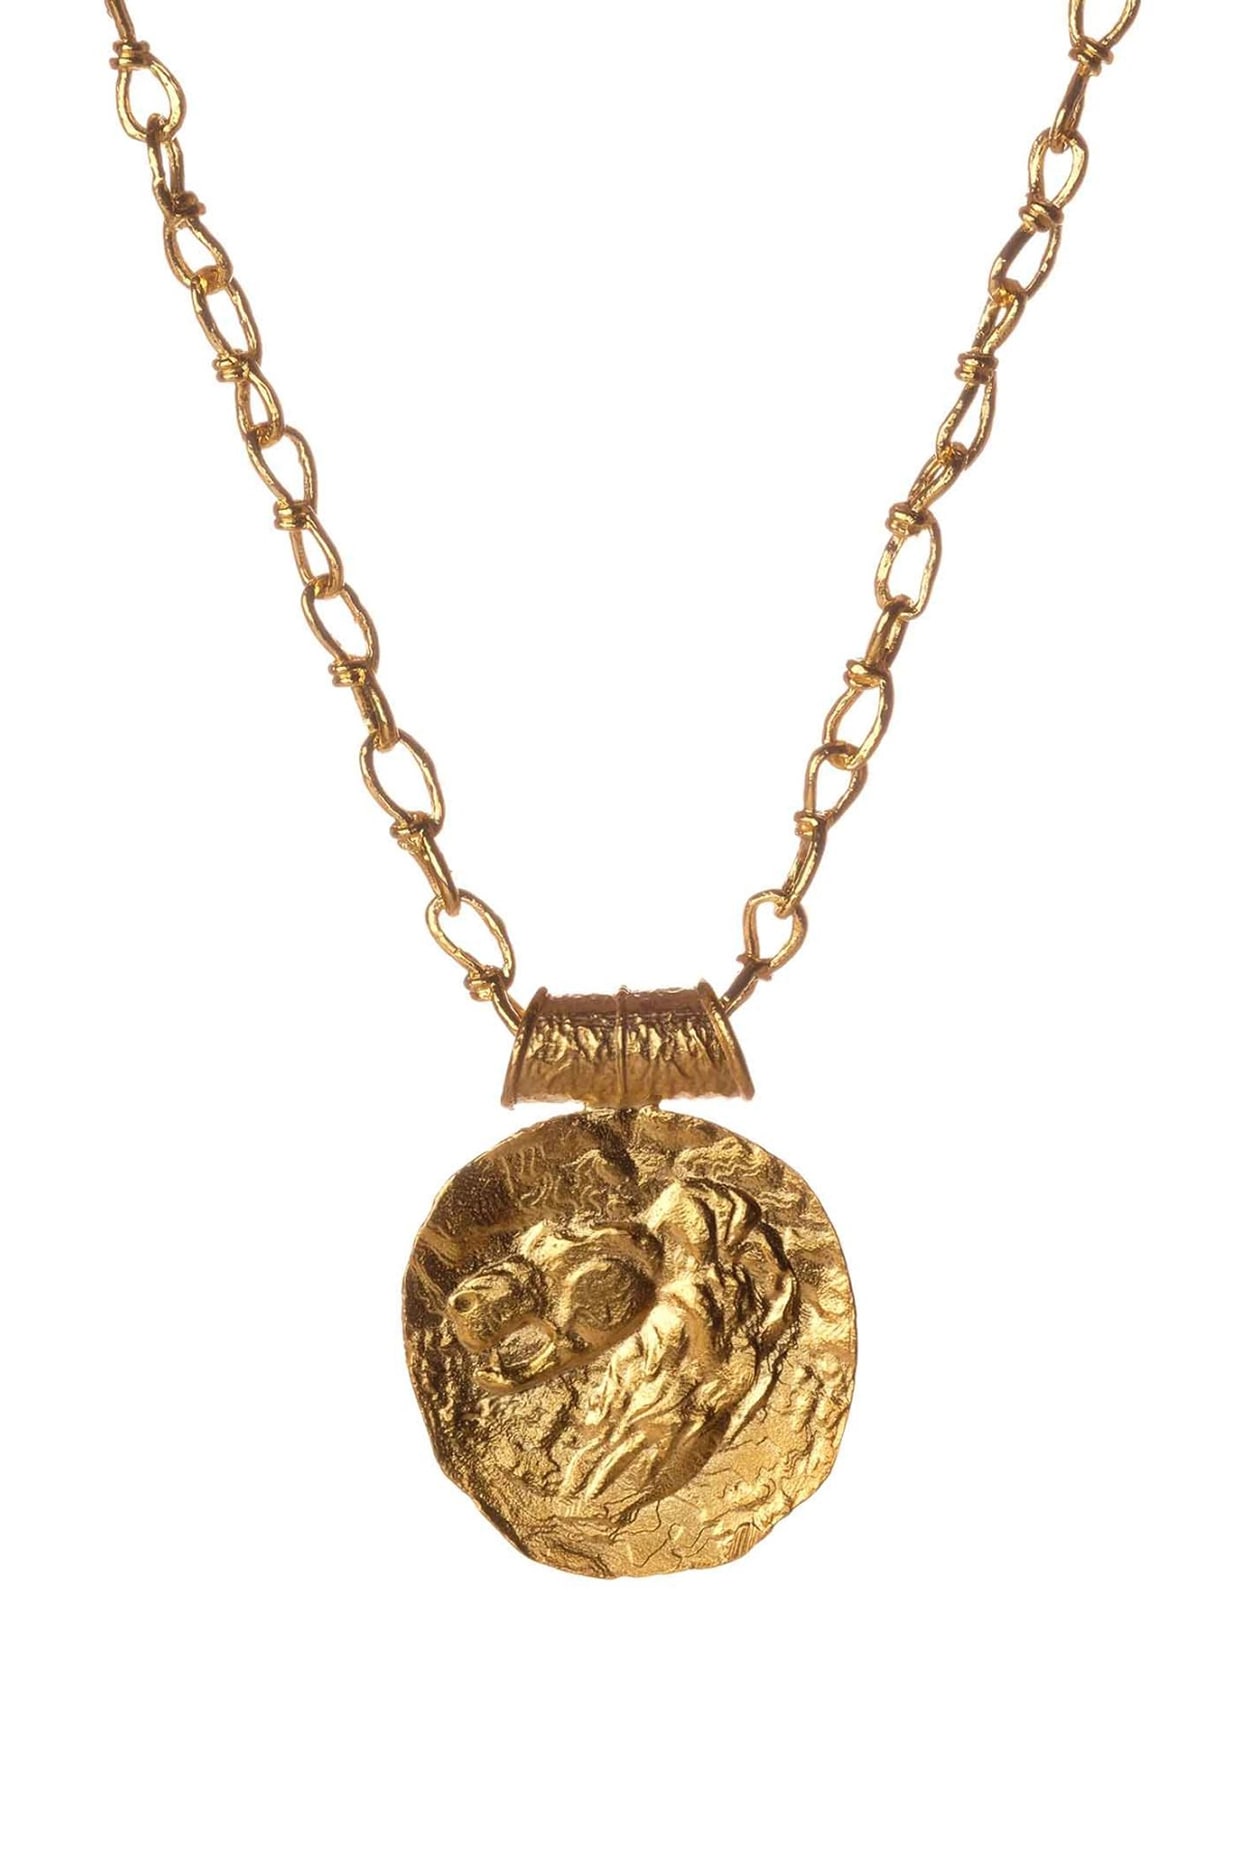 Buy Soul of the Lion Leo Necklace Online in India | Zariin